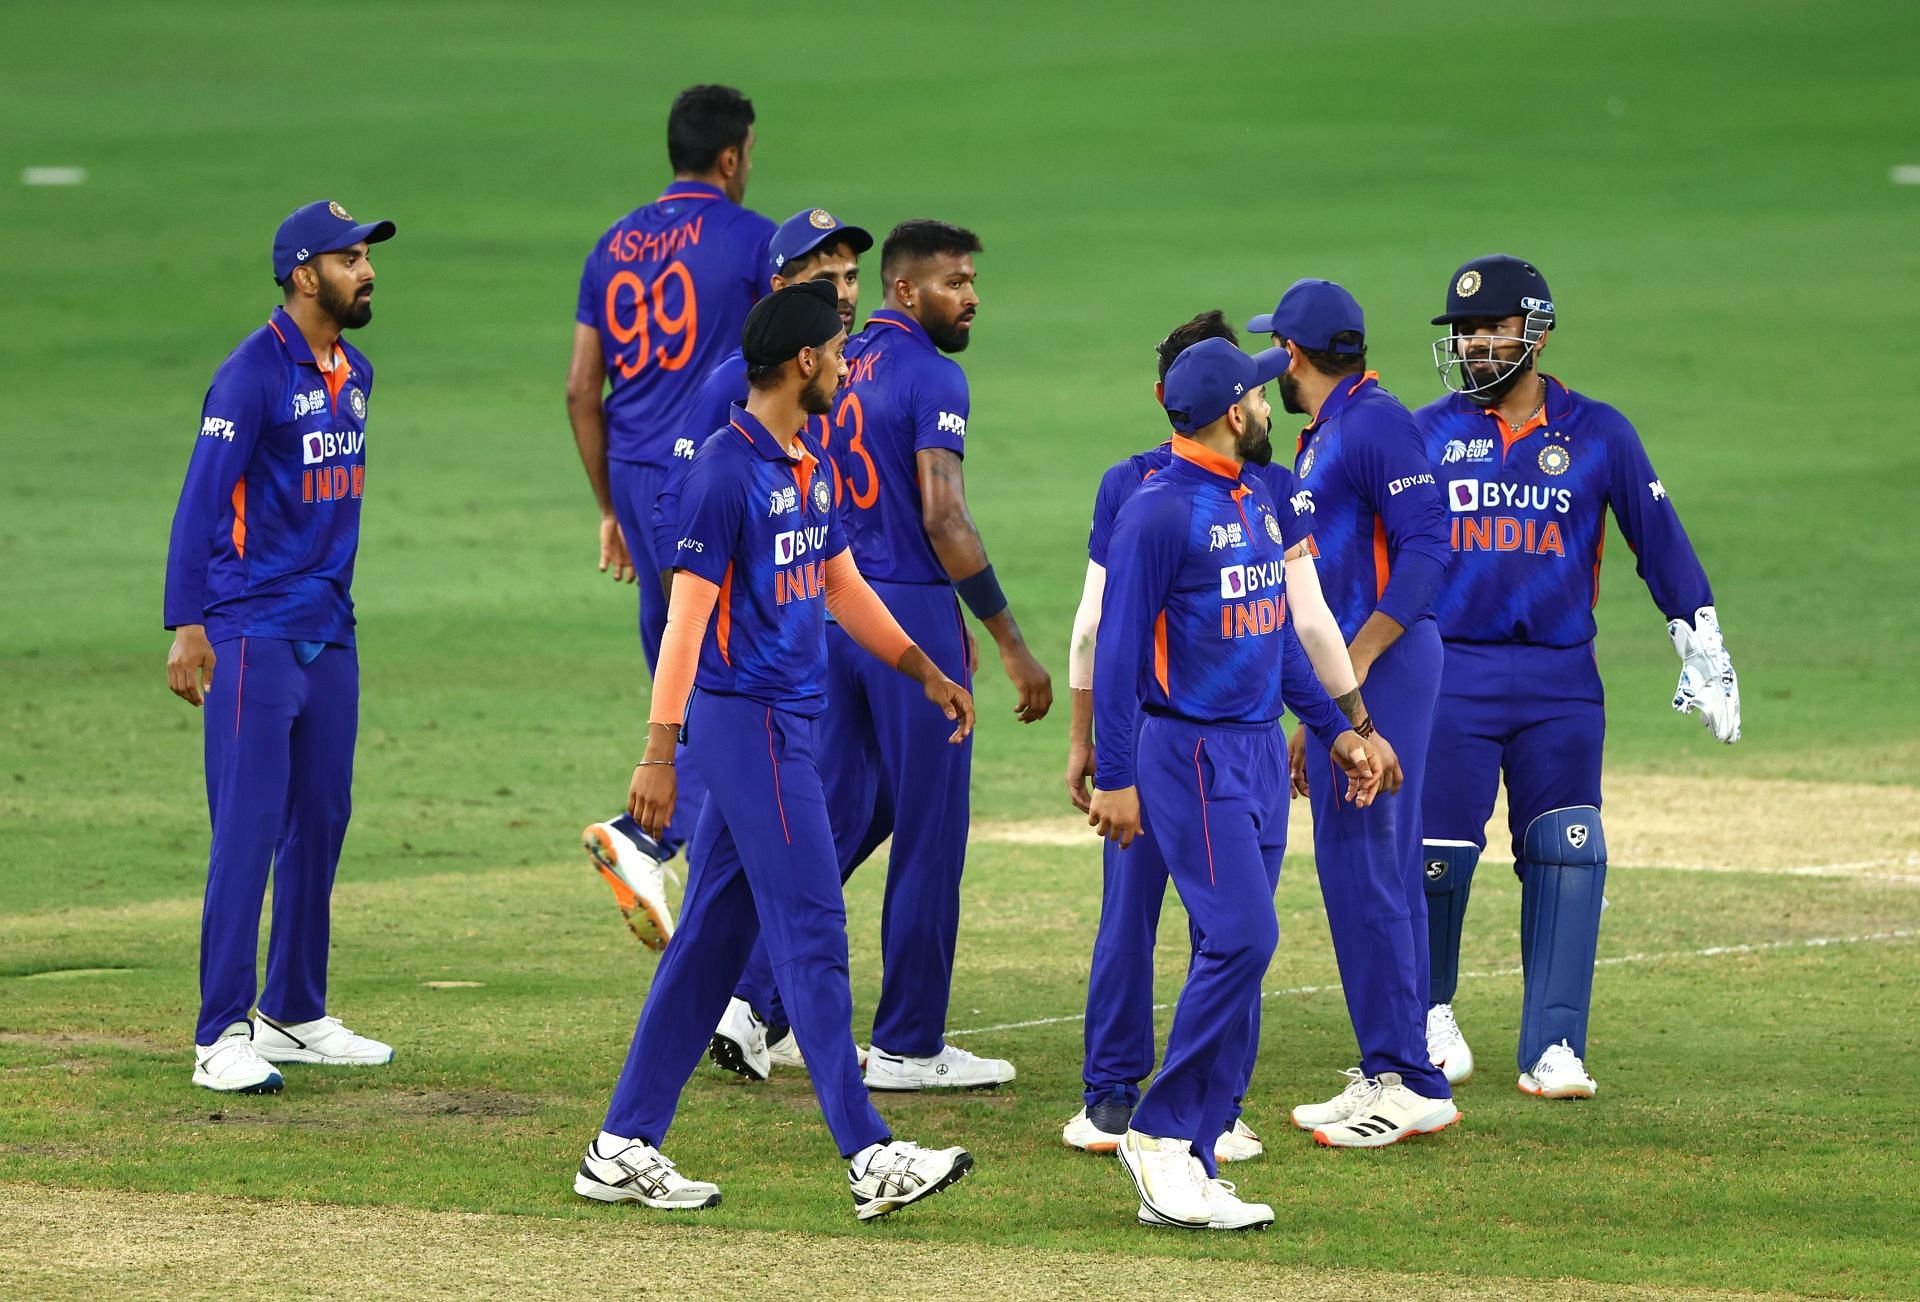 Asia Cup 2022: Gautam Gambhir on India's readiness for the World Cup being  judged by losses against Pakistan and Sri Lanka